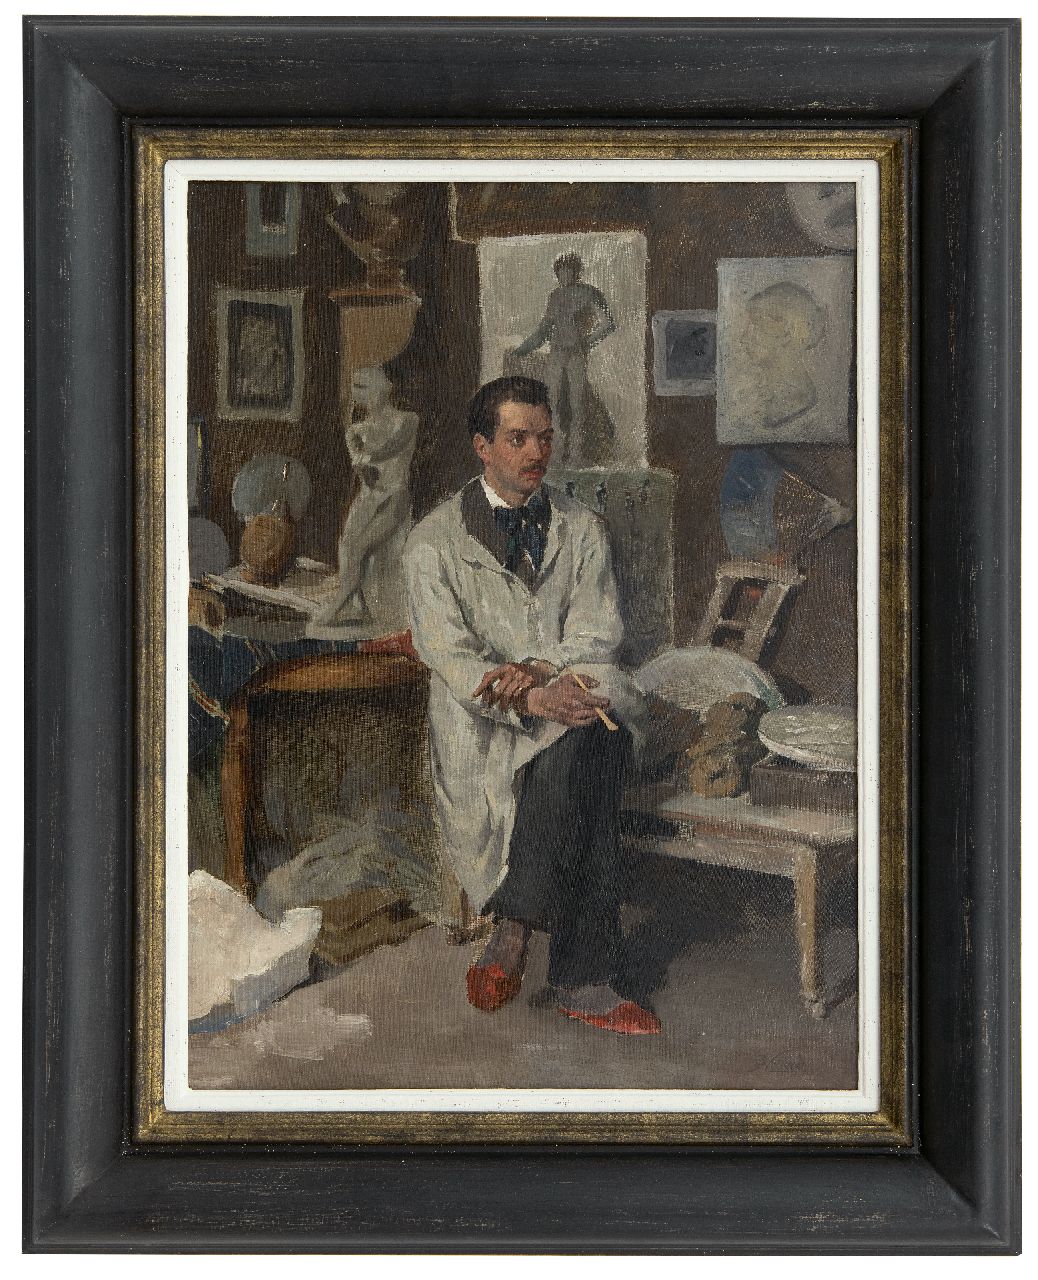 Weiland J.  | Johannes Weiland, Artist in his studio, oil on canvas 49.2 x 37.7 cm, signed l.r.